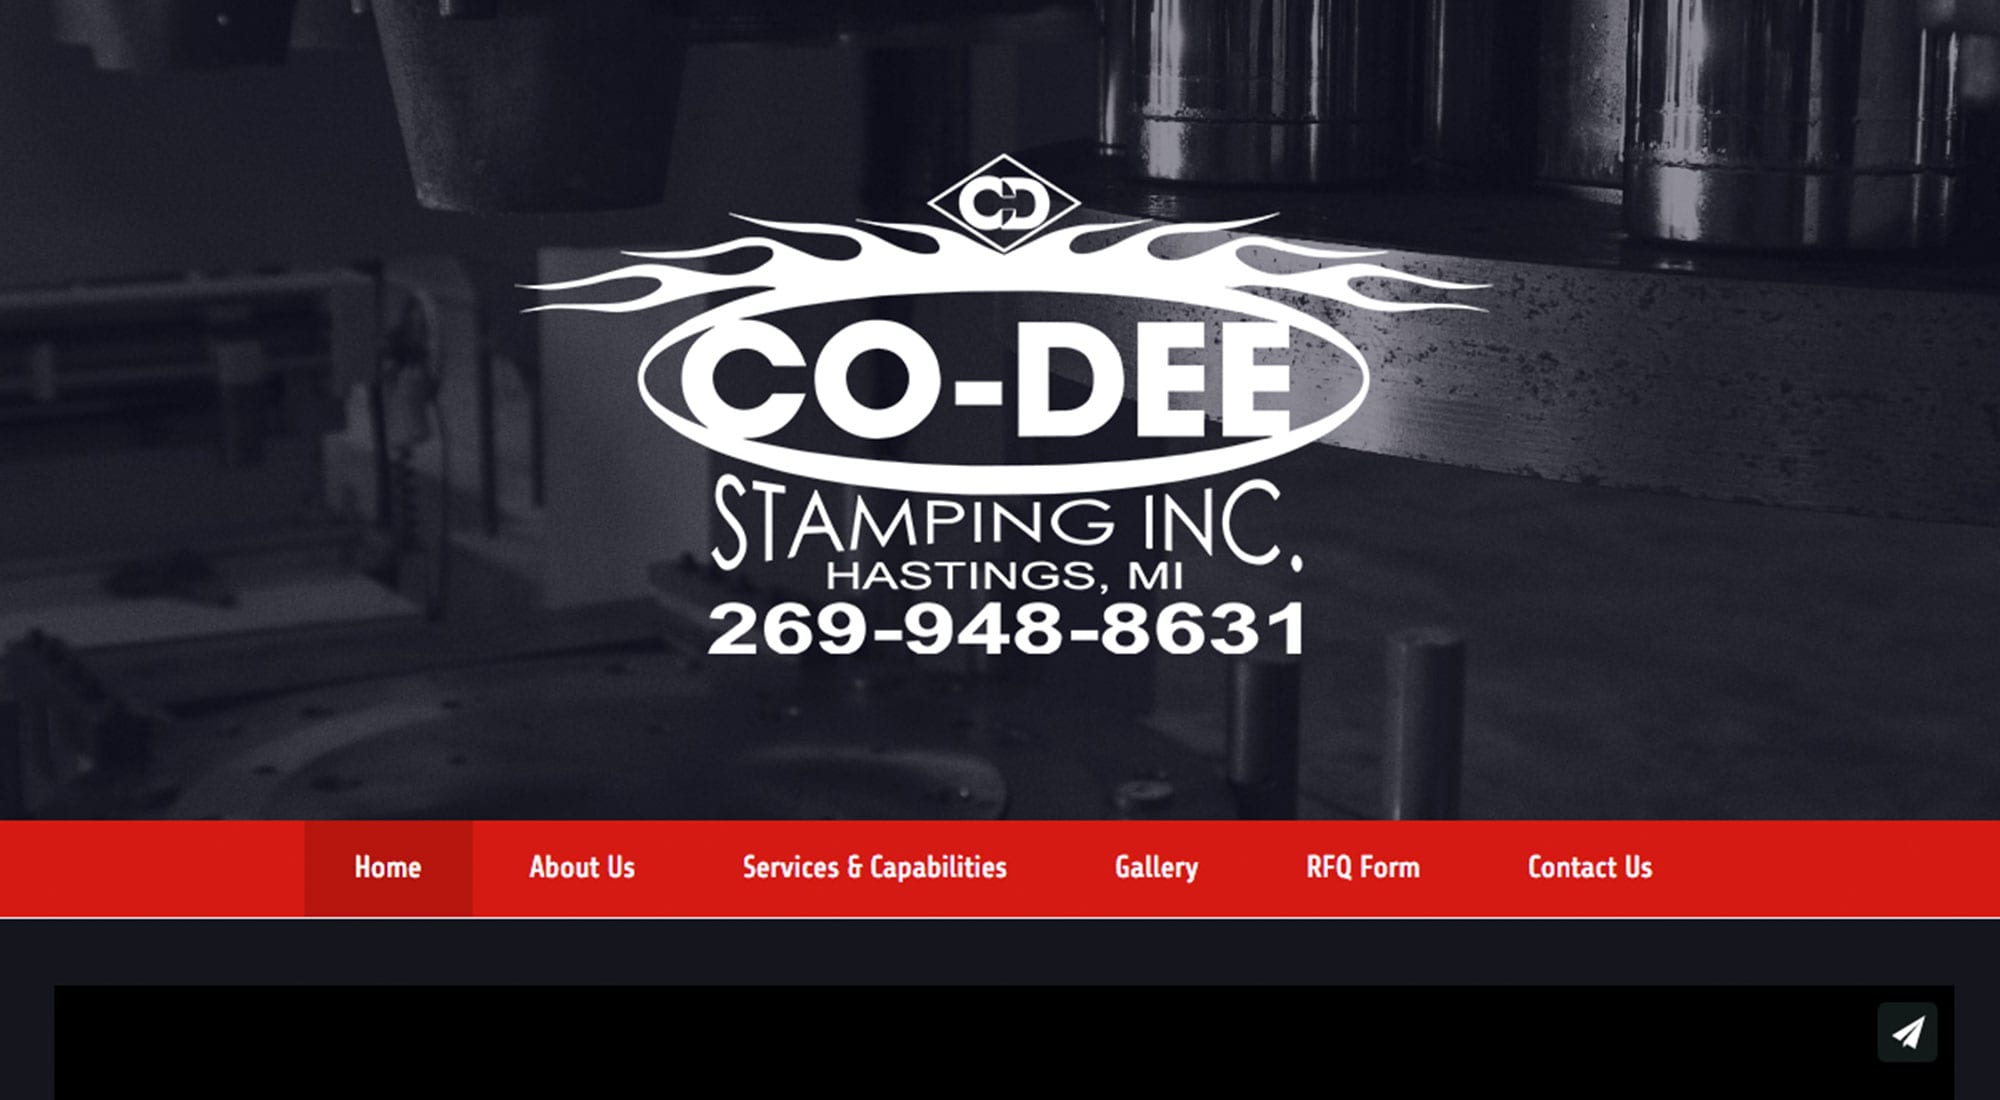 Co-Dee Stamping Hastings MI Featured